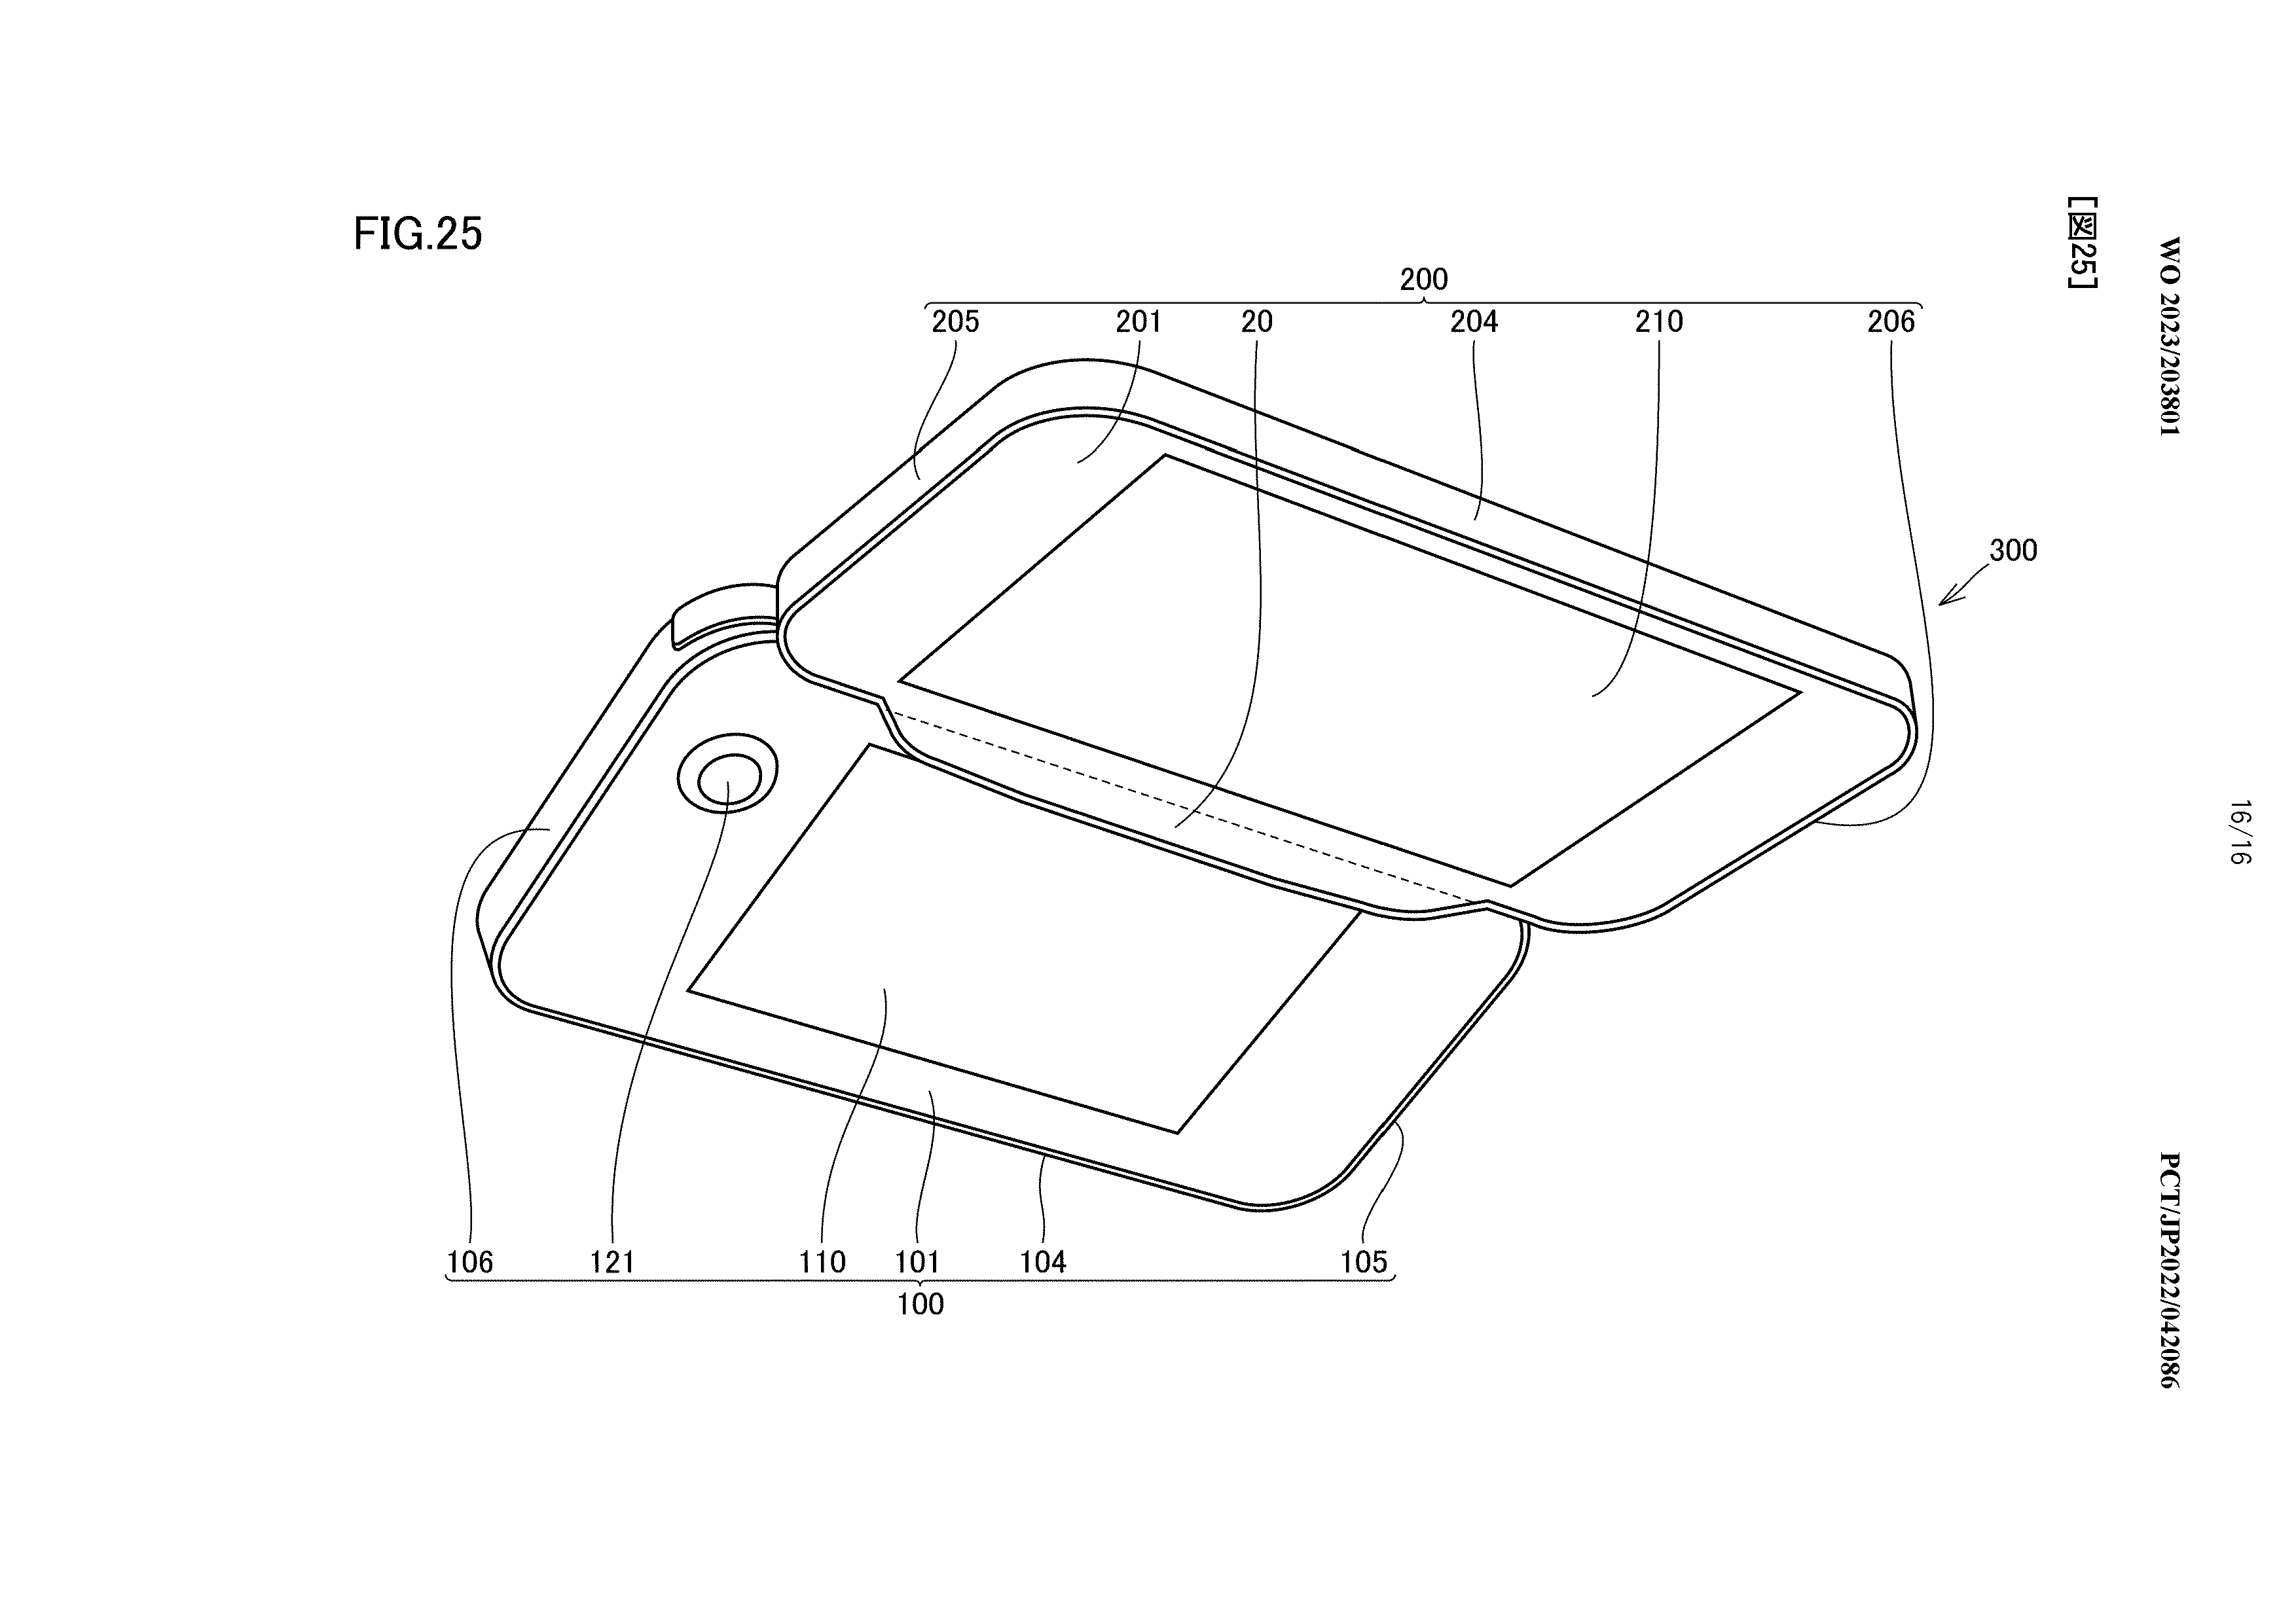 An image of an Nintendo patent for a handheld console